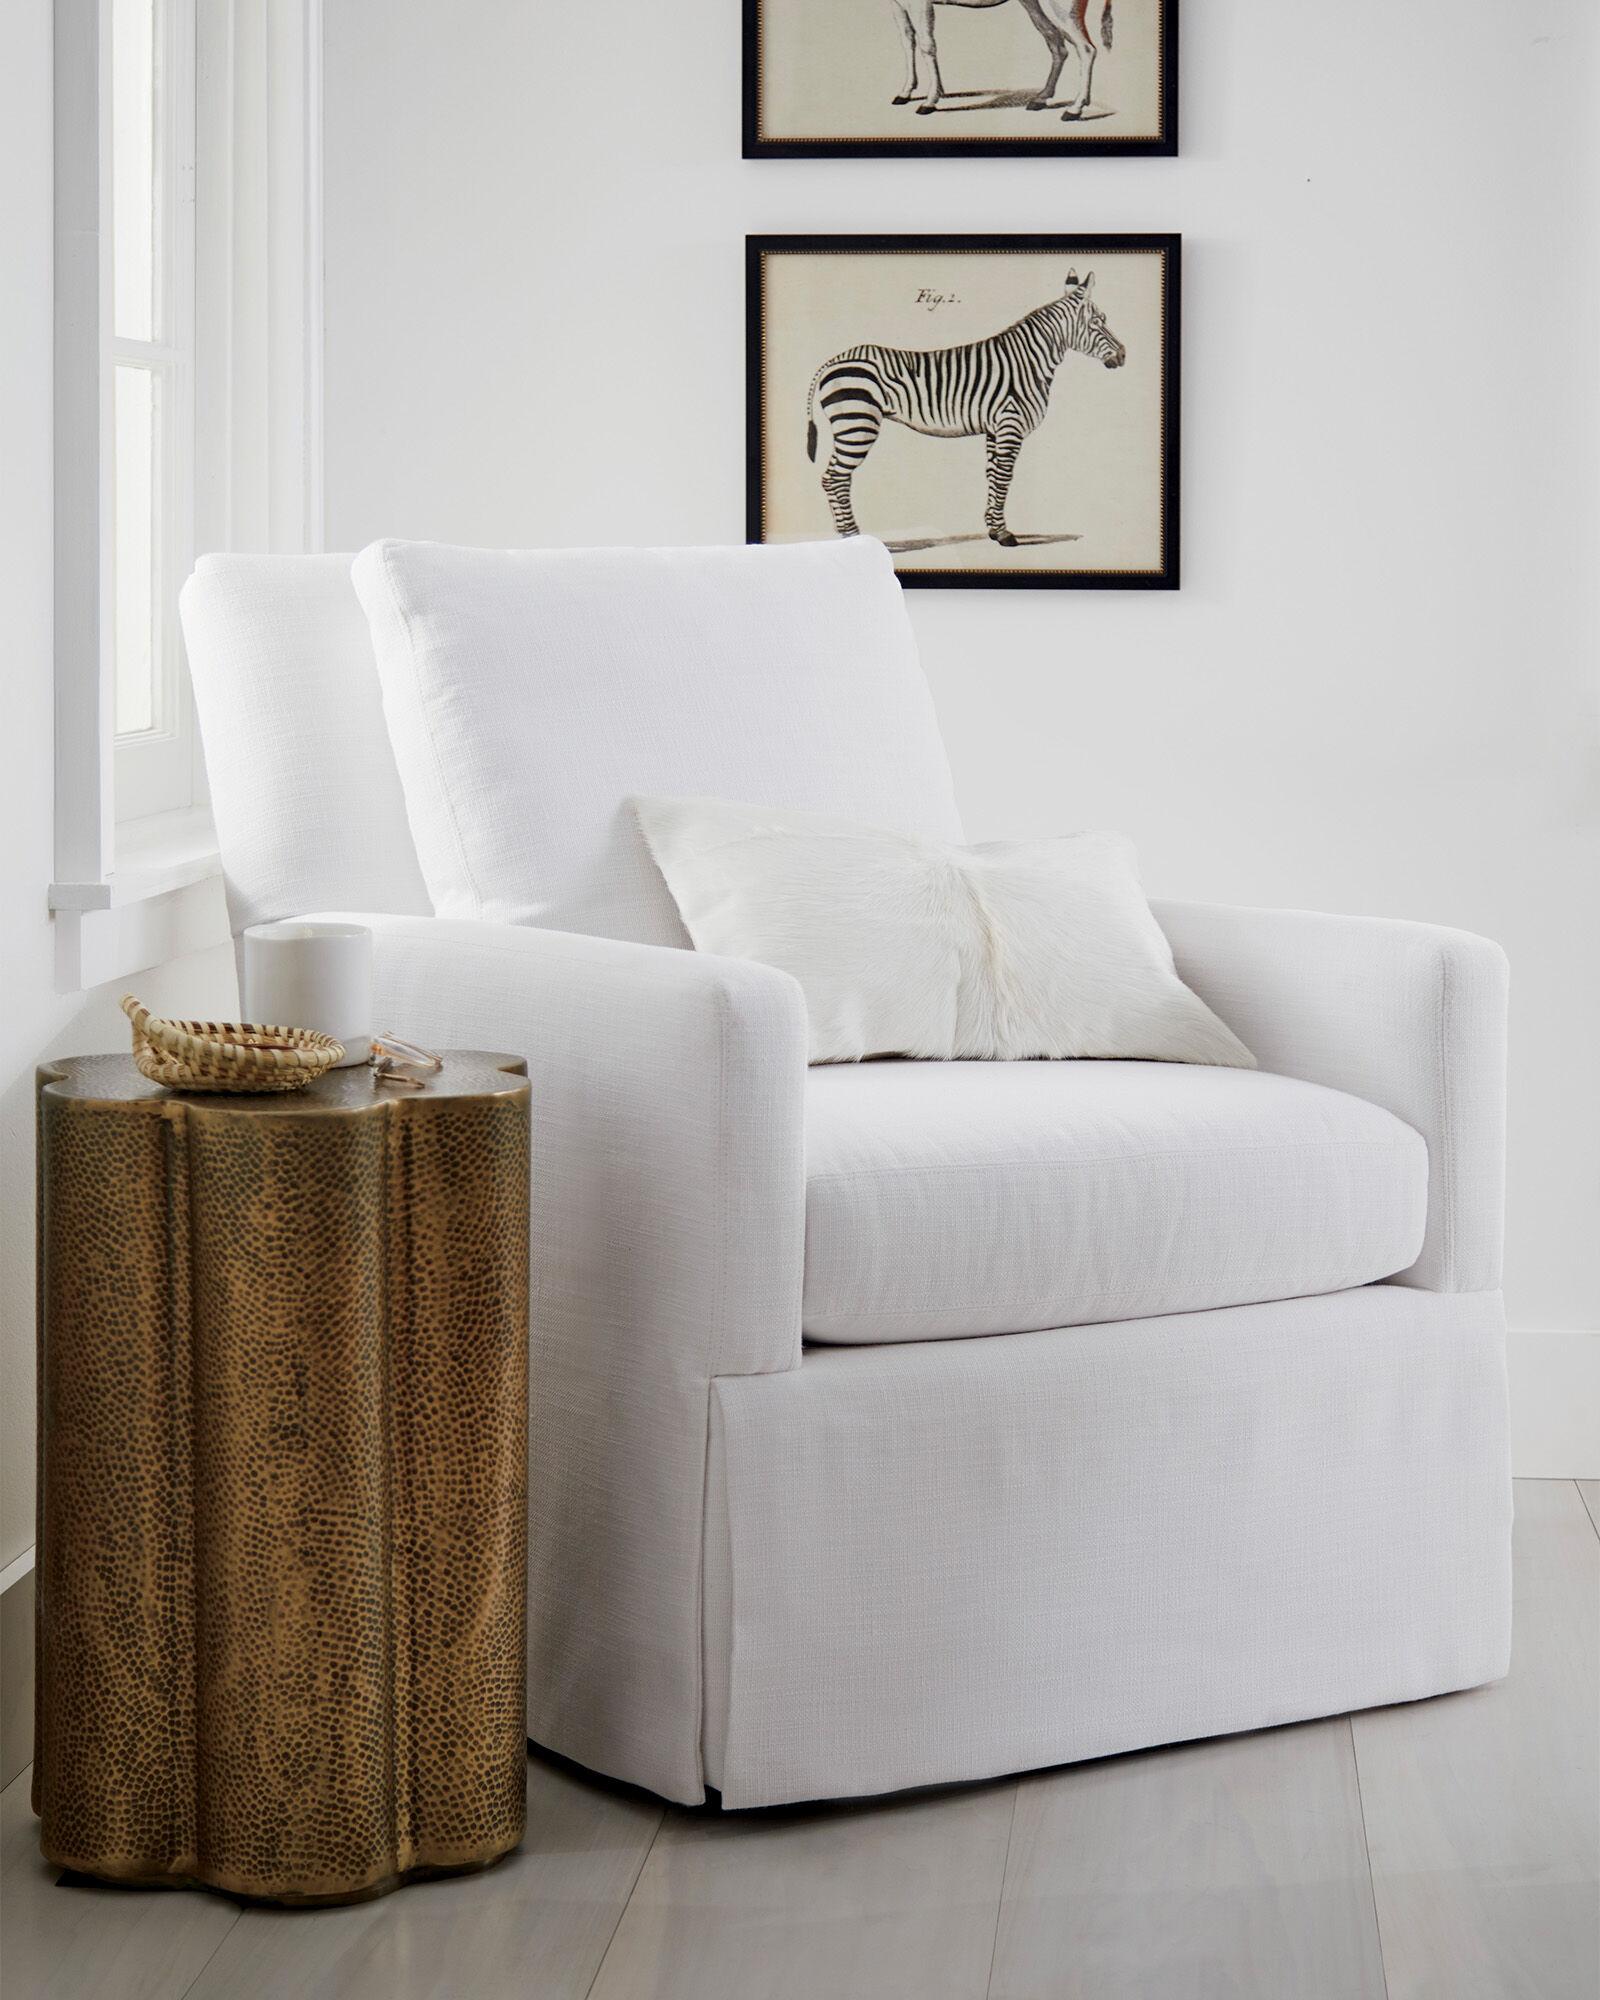 Match Any Style with a White Slip Covered Chair